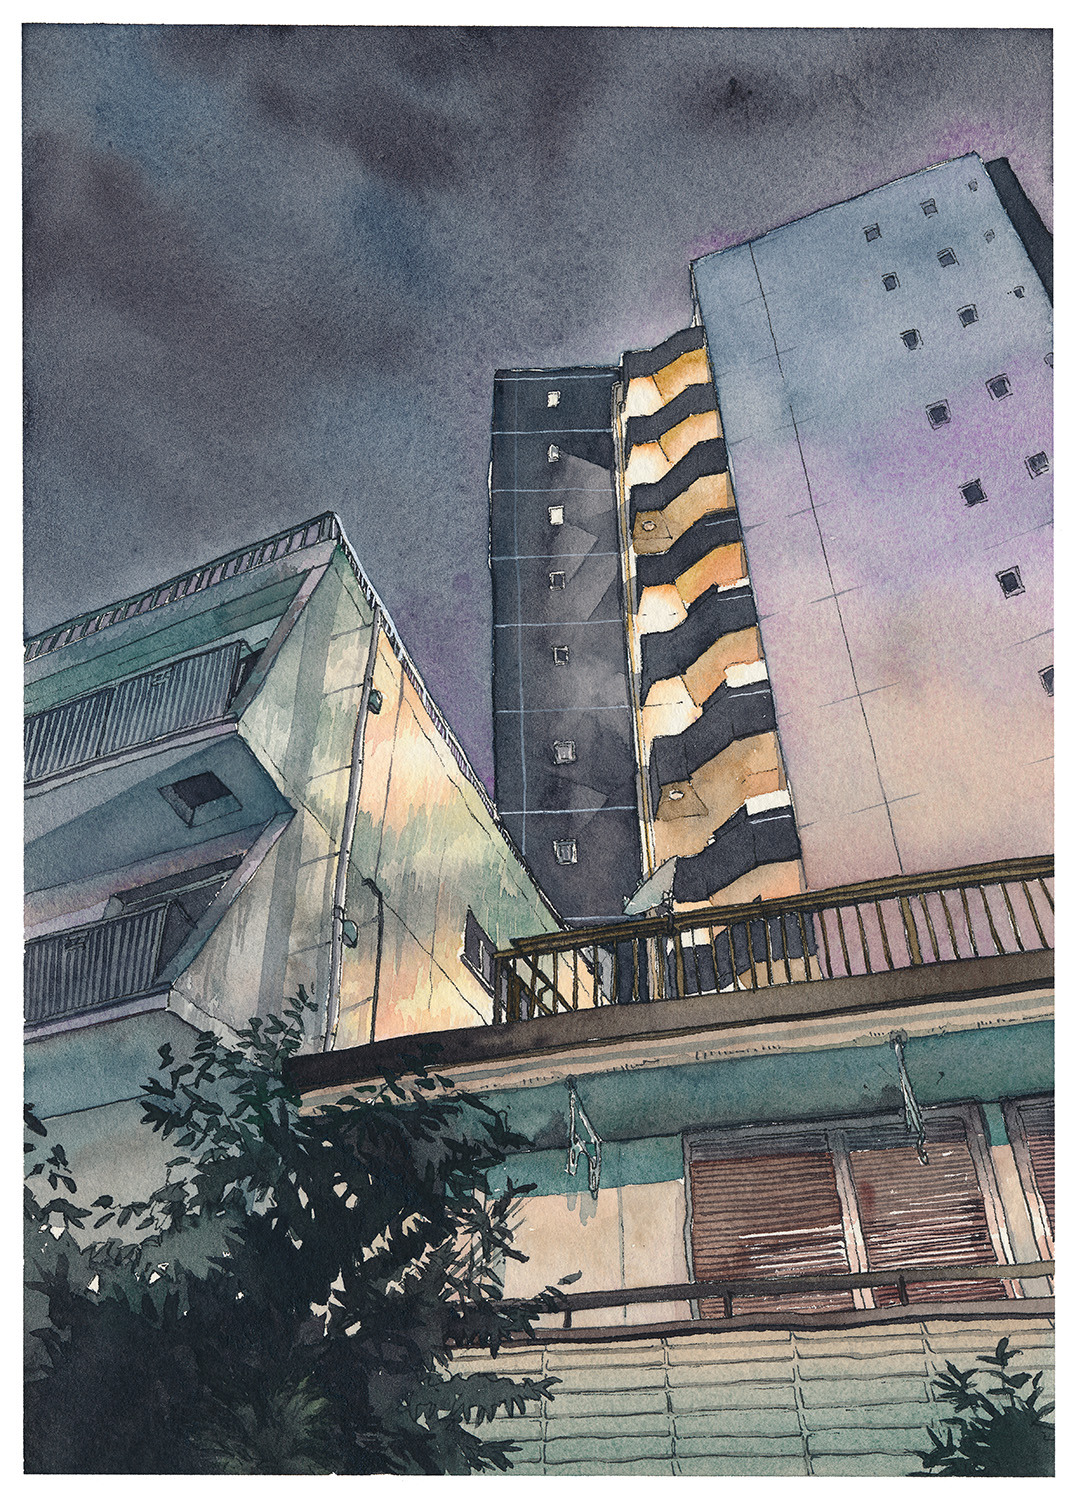 Mateusz Urbanowicz — I wanted to try a new watercolour sketchbook I